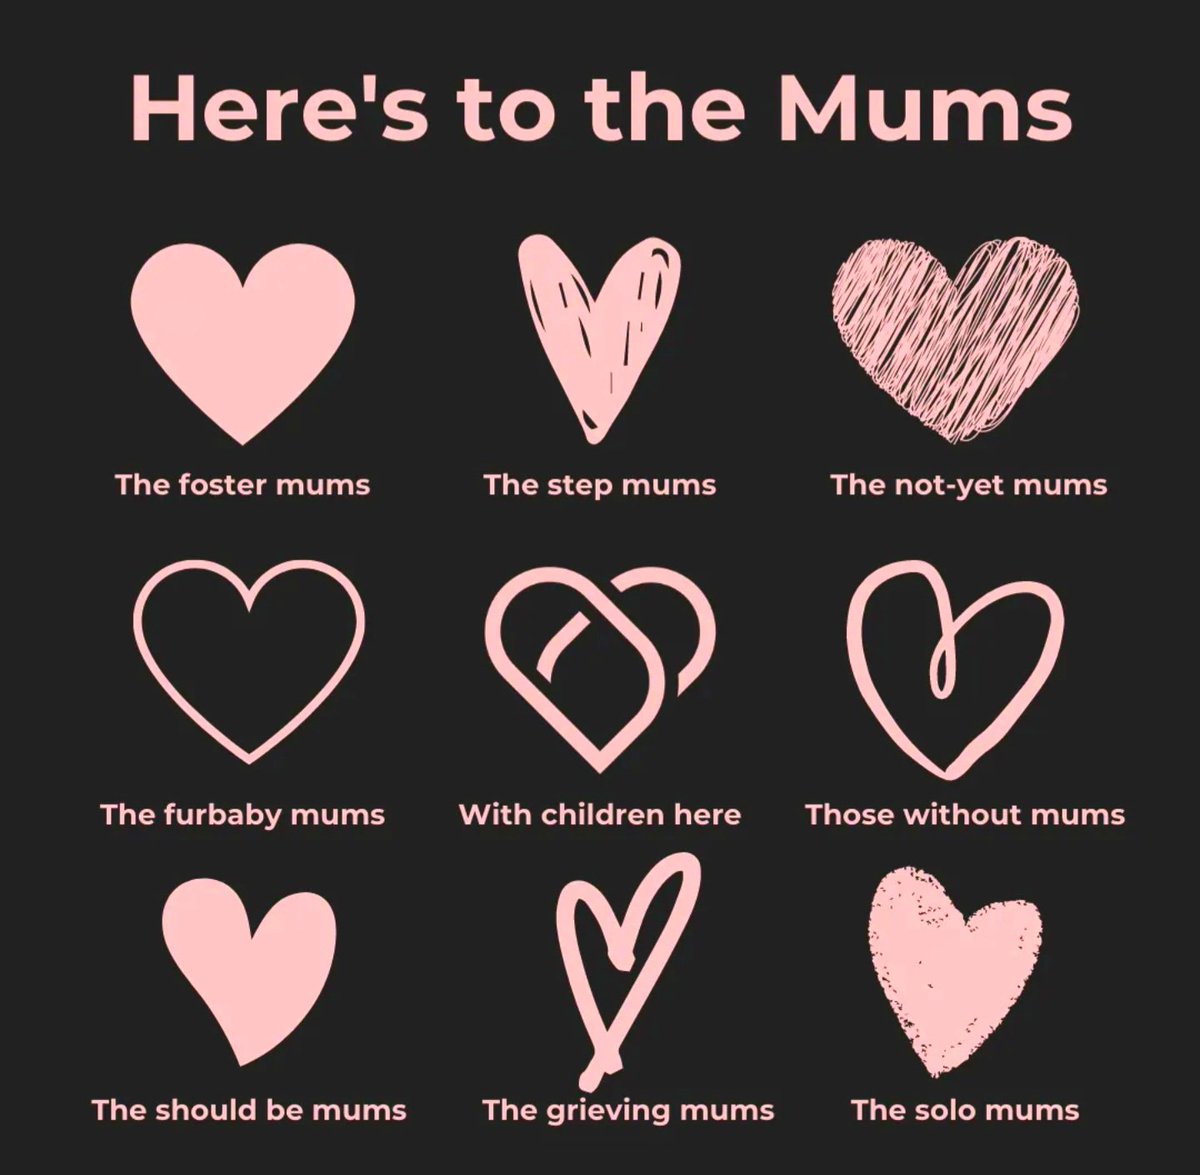 Happy Mother's Day to ALL the incredible caregivers out there. Whether you're a mother, grandmother, stepmother, godmother, foster mother, or an auntie, we celebrate YOU!💐 A very special Mother's Day to those who lost their moms, those who don't have a mom, and ESPECIALLY those